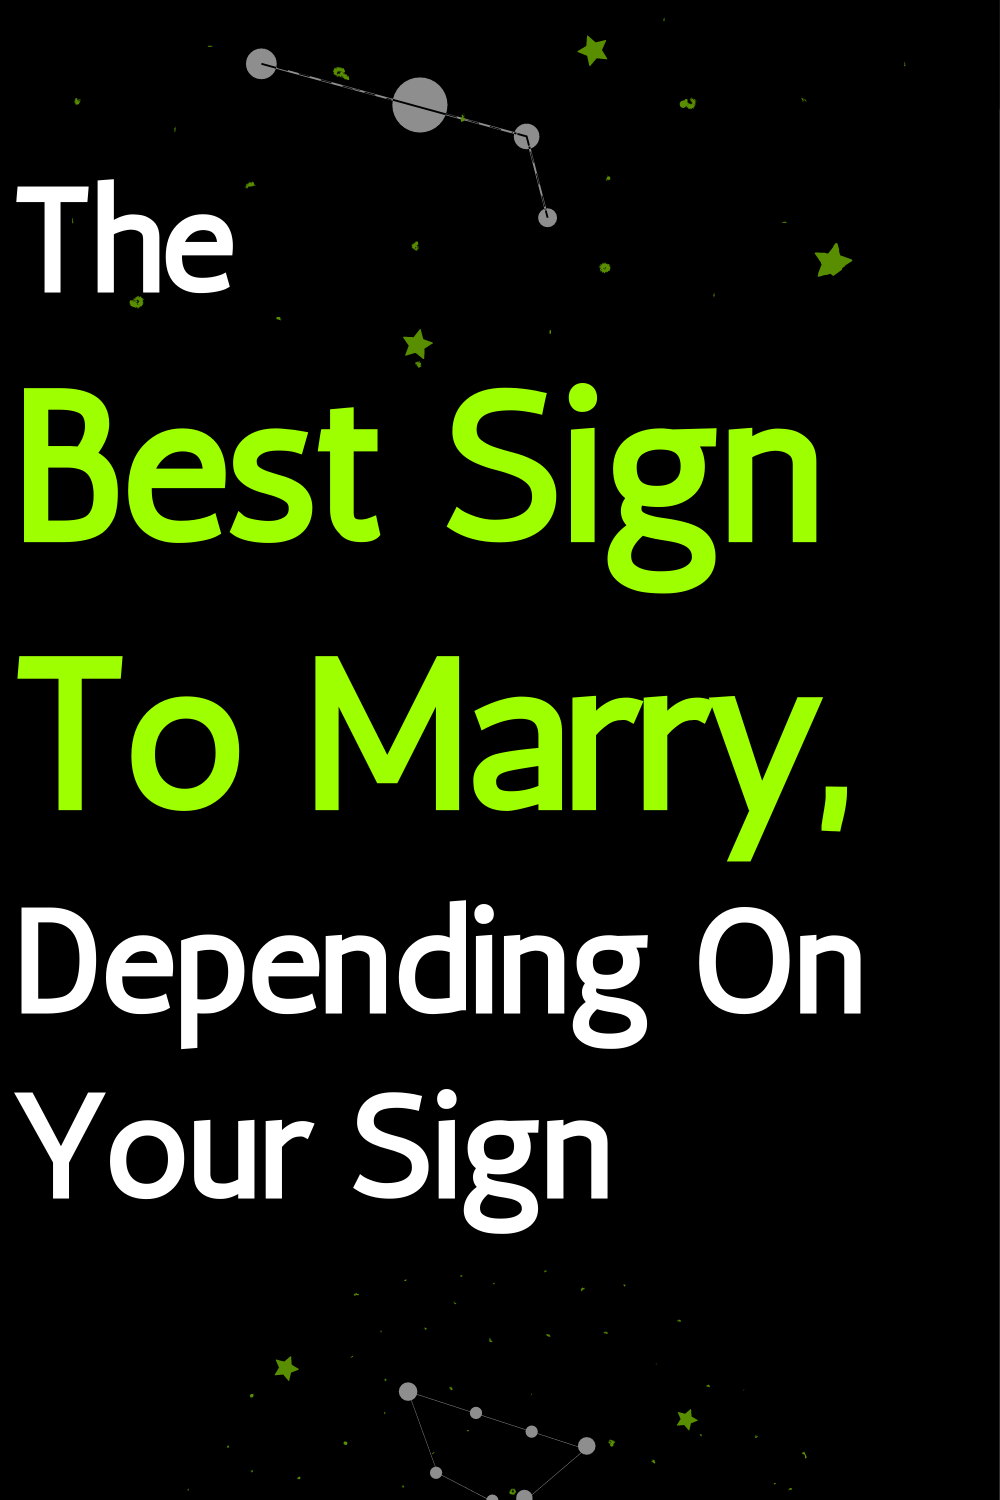 The Best Sign To Marry, Depending On Your Sign